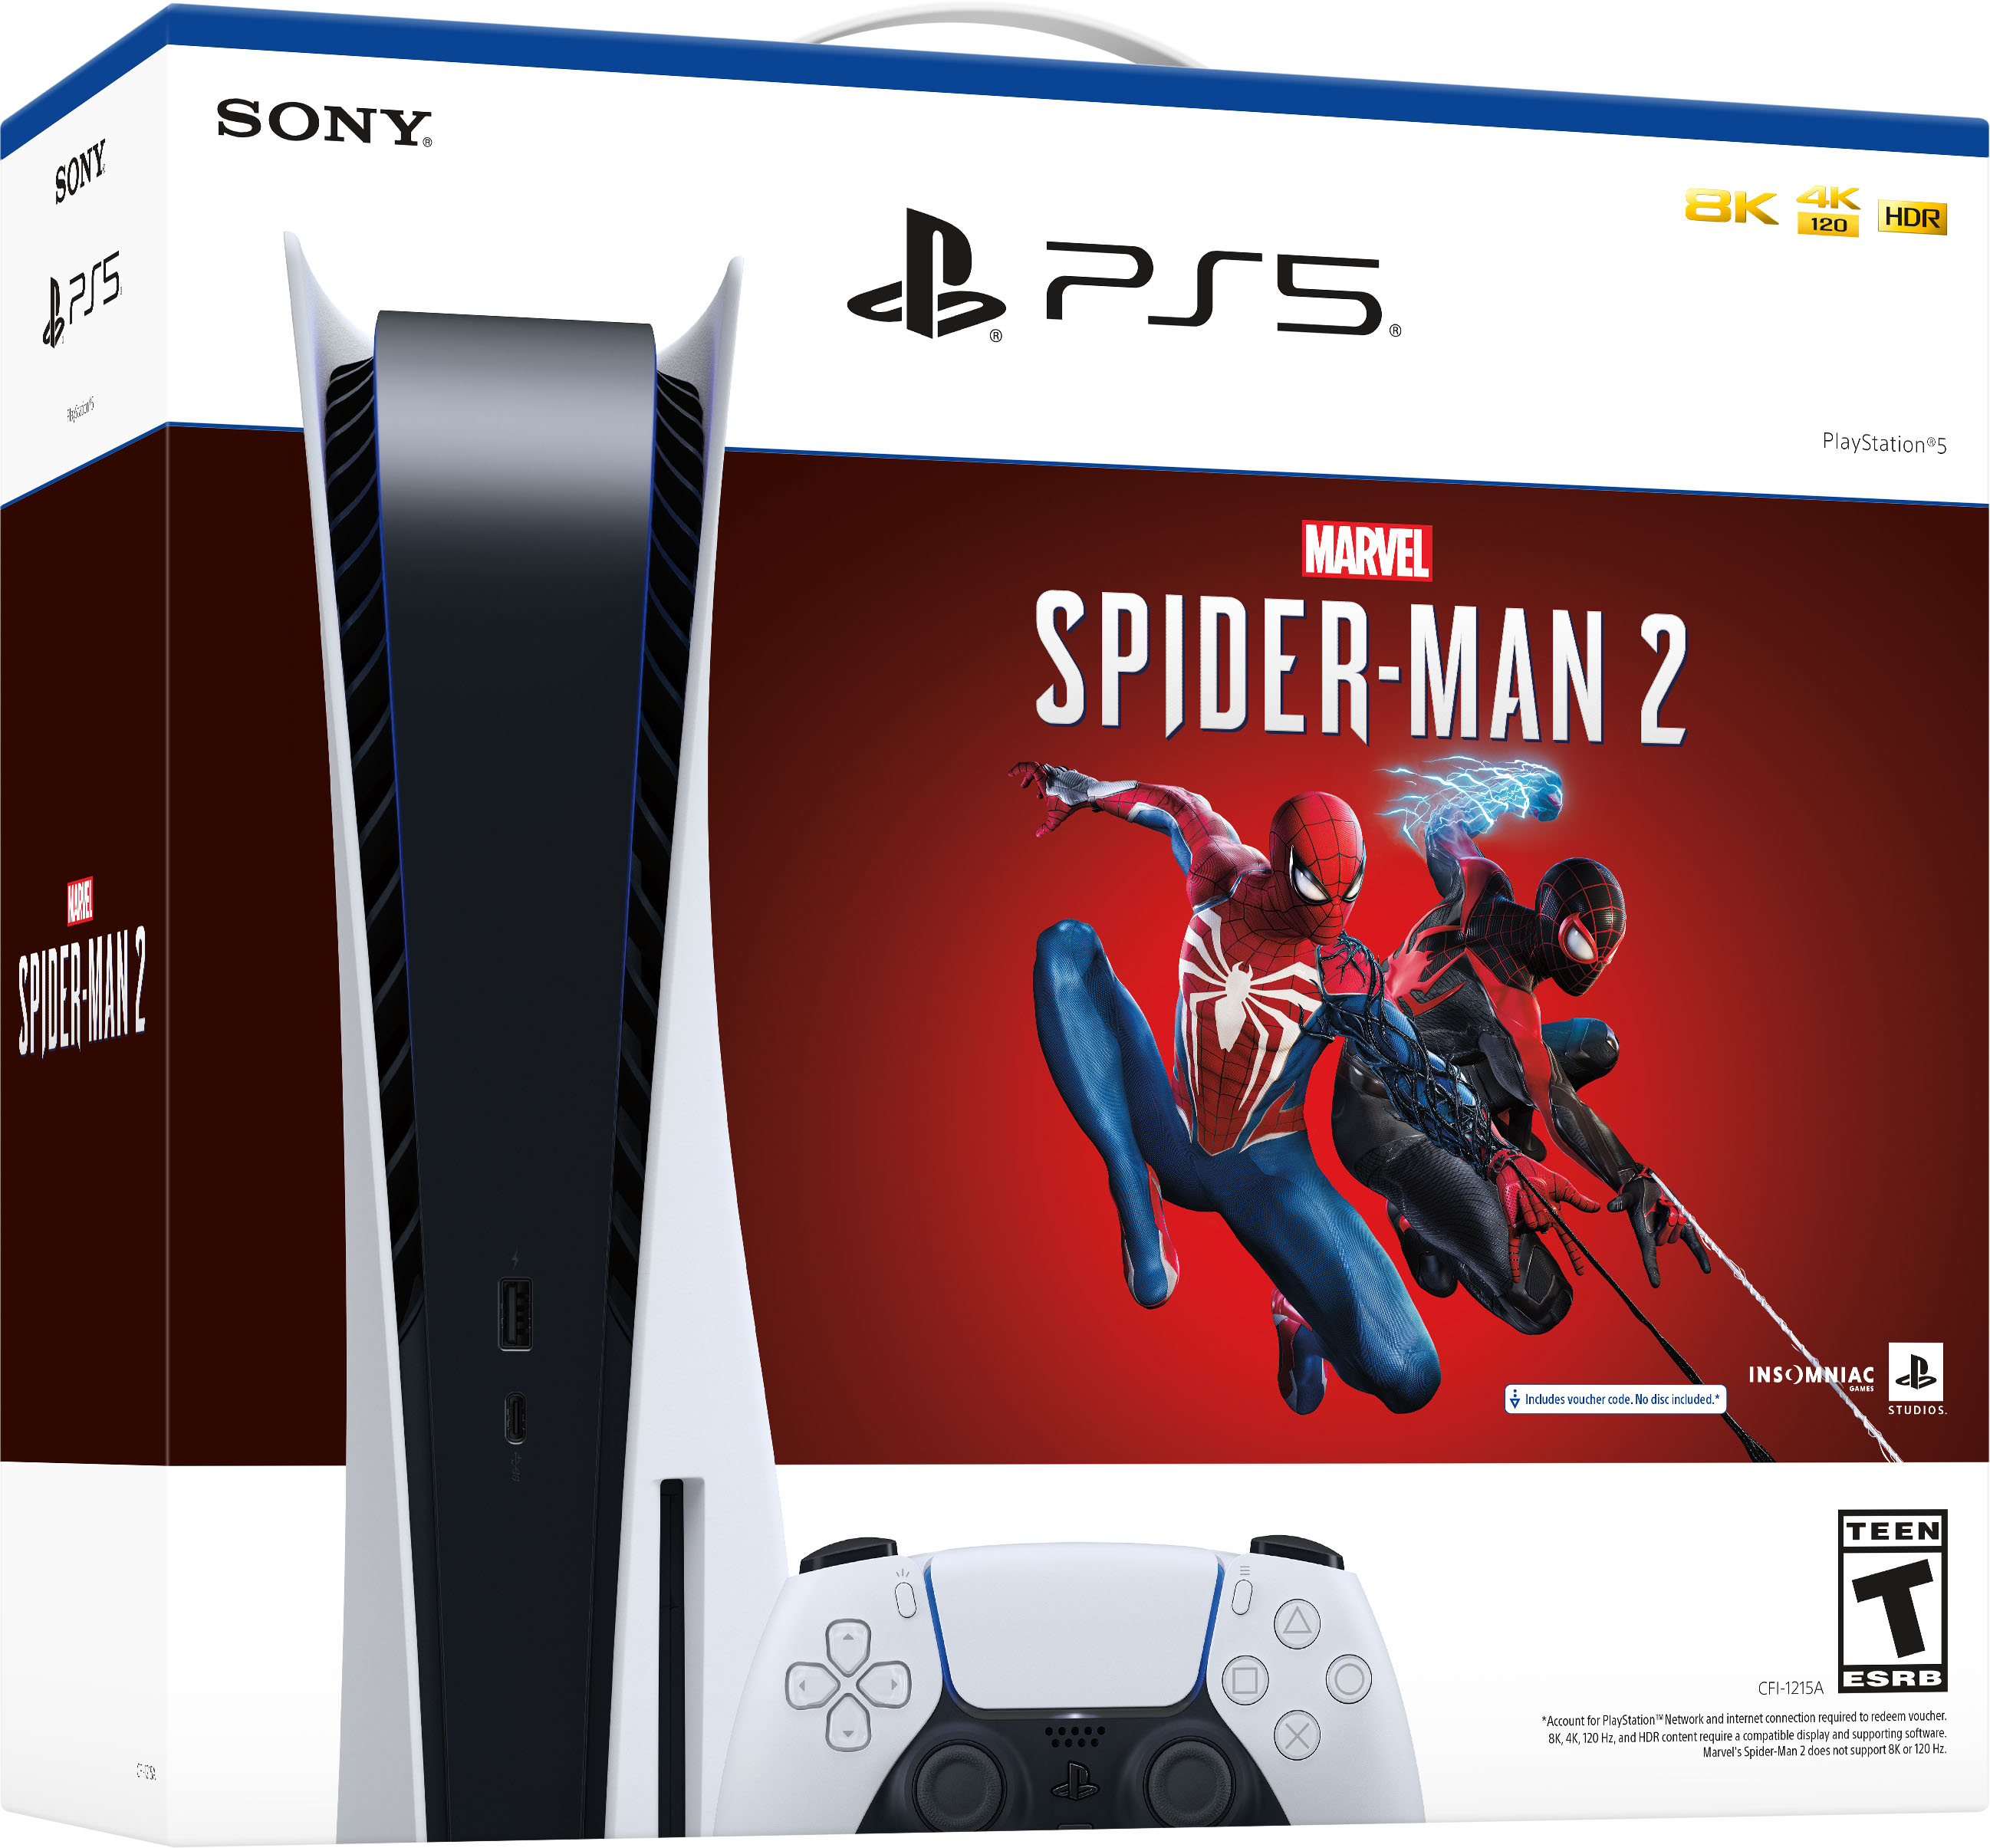 Best Buy: Sony PlayStation 5 Console – Marvel's Spider-Man 2 